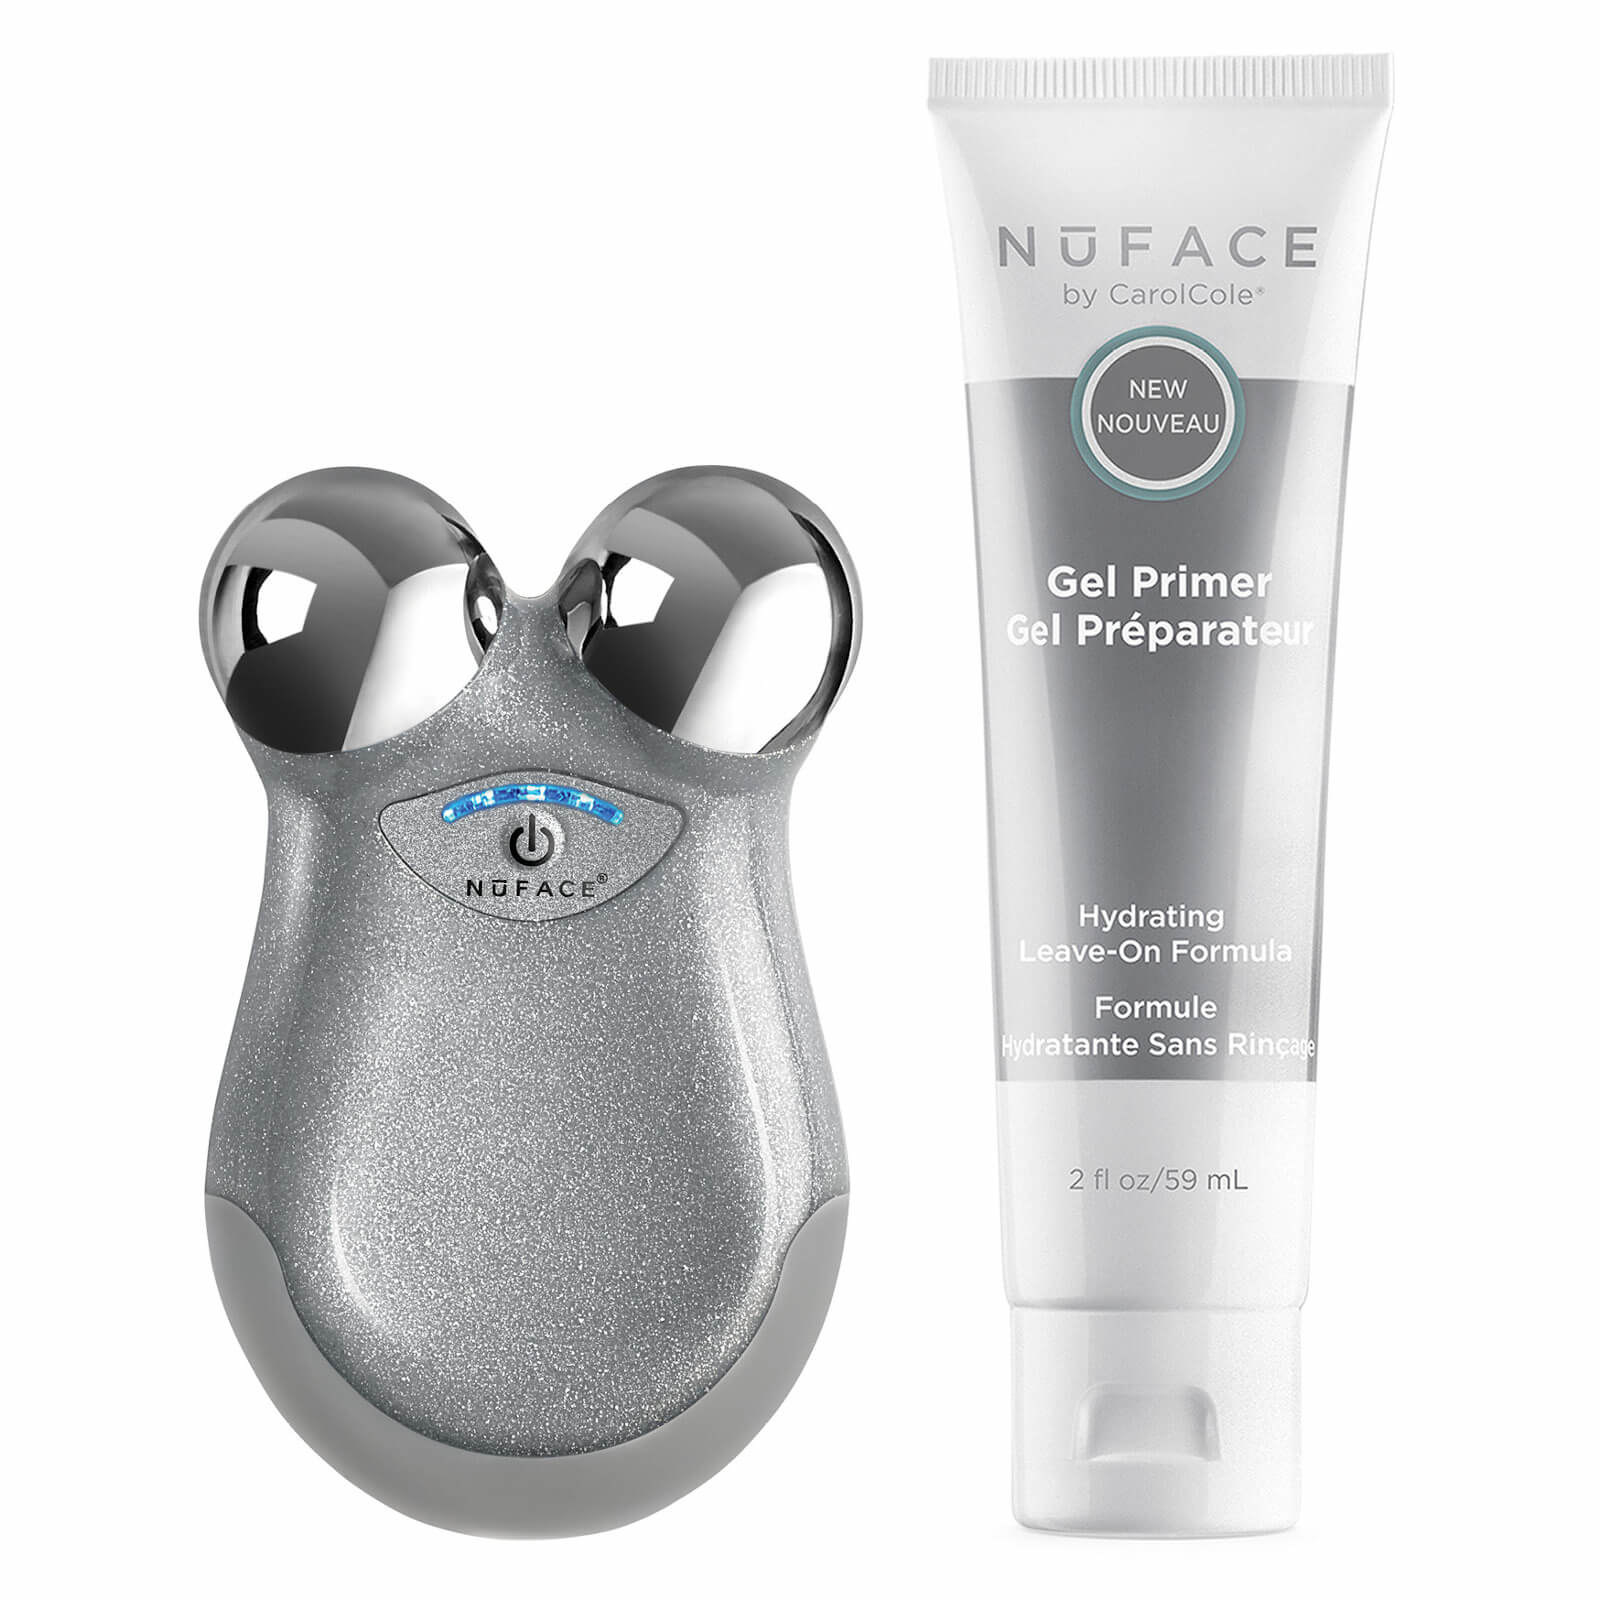 Silver NuFace device with two circular metal balls at the end beside a bottle of the gel primer